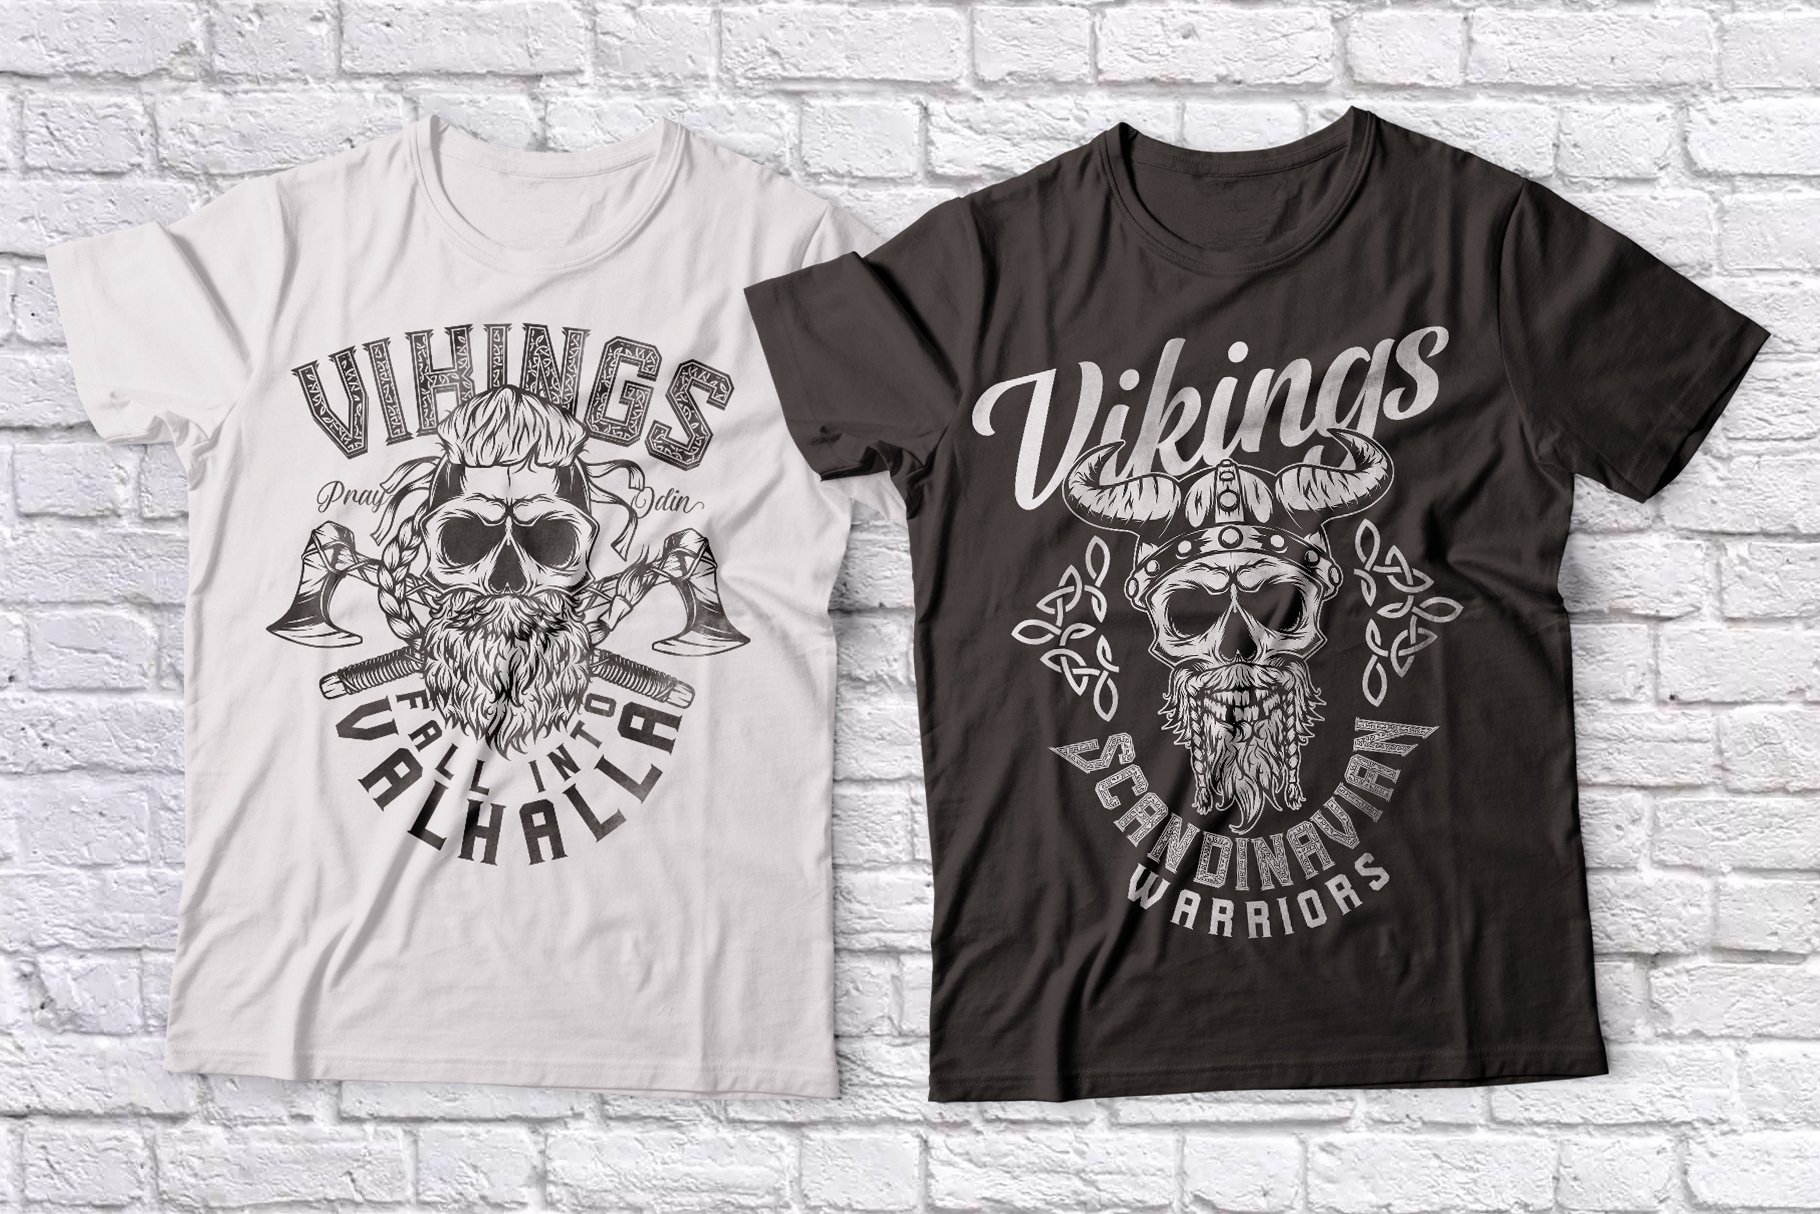 Black and white t-shirts with the scary viking skulls.